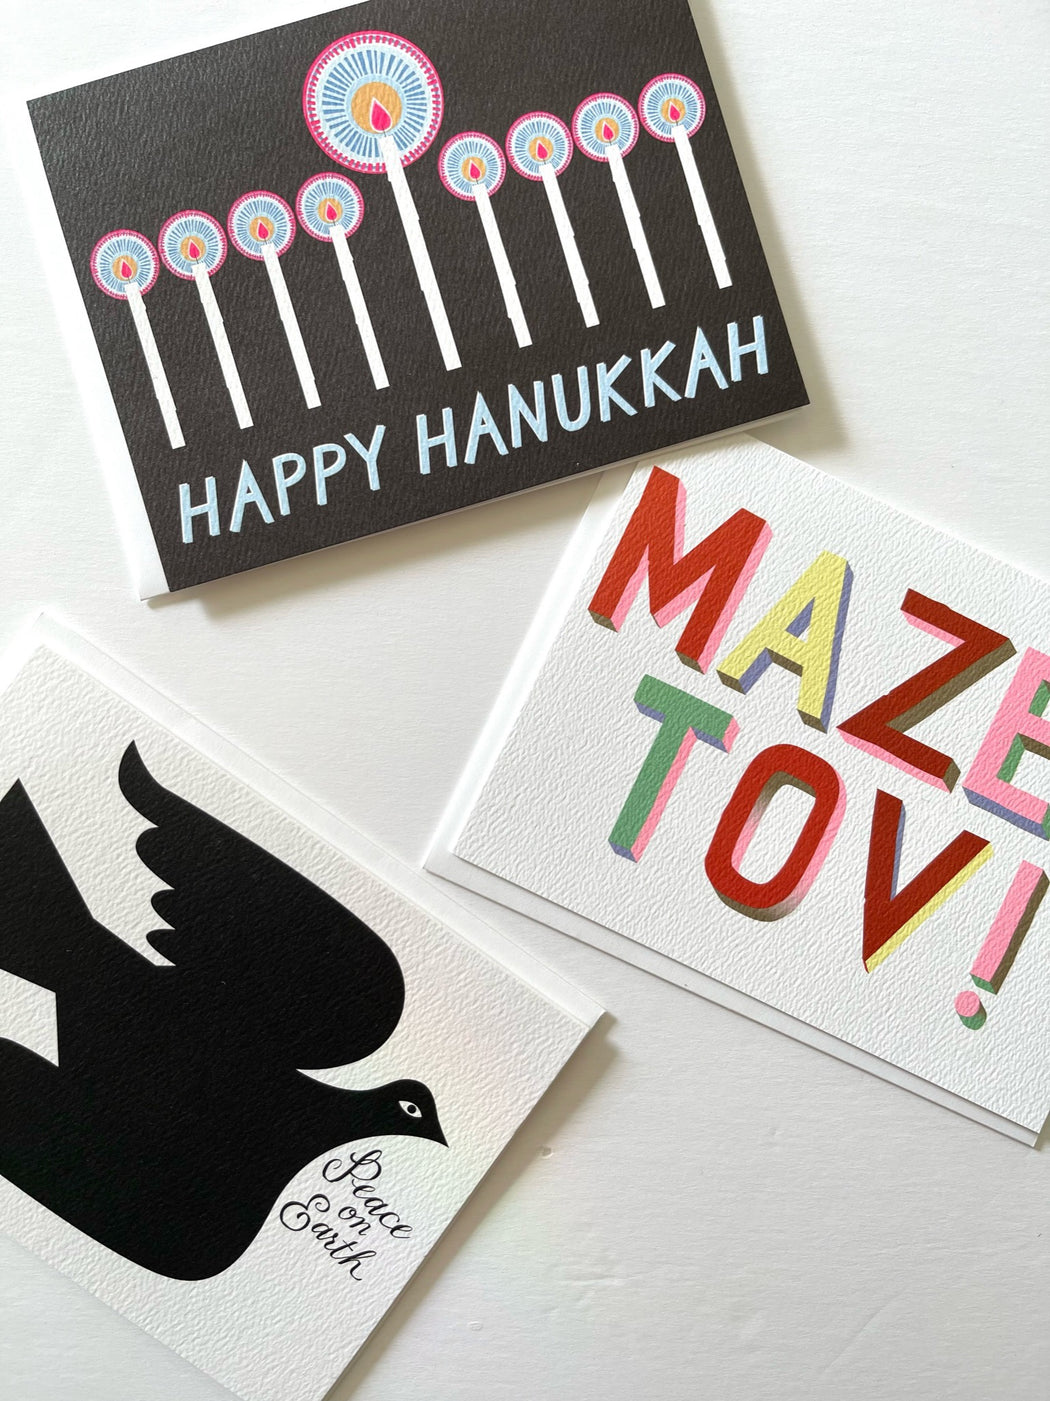 Happy Hanukkah Note Card with Menorah for Festival of Lights